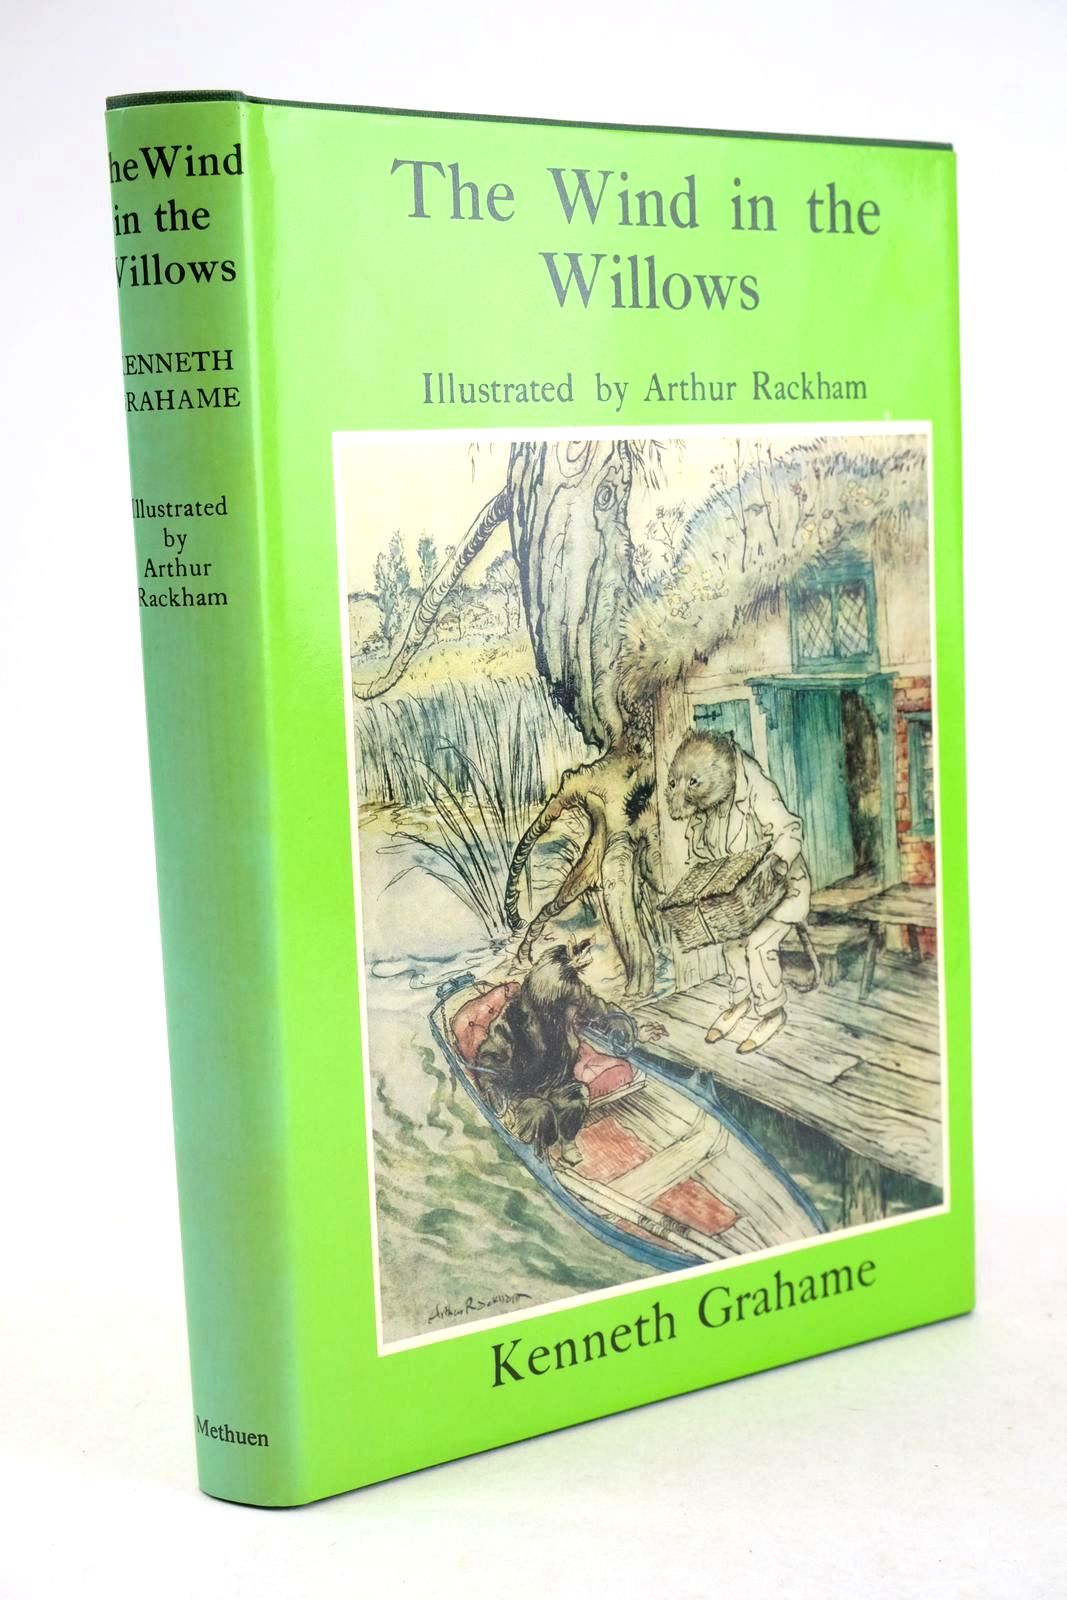 Photo of THE WIND IN THE WILLOWS written by Grahame, Kenneth illustrated by Rackham, Arthur published by Methuen Children's Books (STOCK CODE: 1326136)  for sale by Stella & Rose's Books